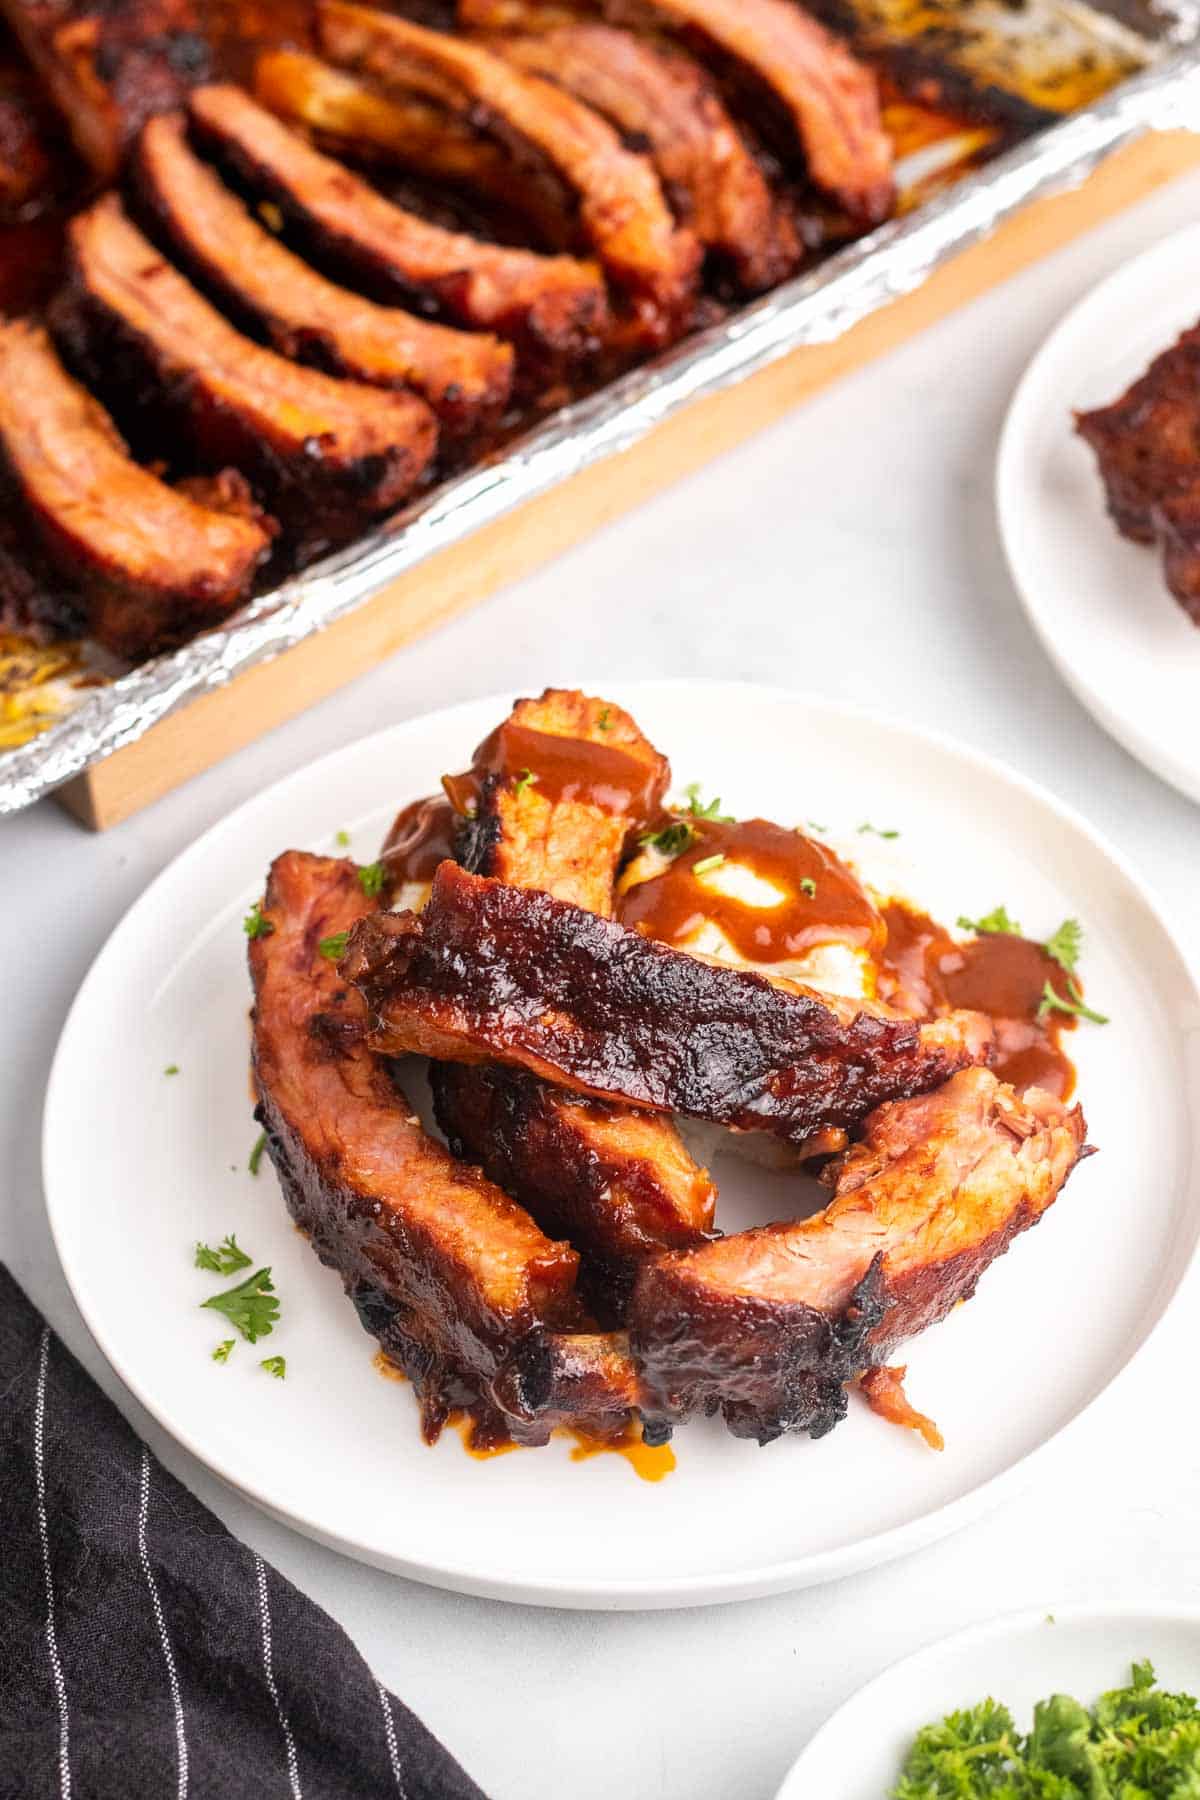 Four ribs on a white plate next to a tray of sliced ribs